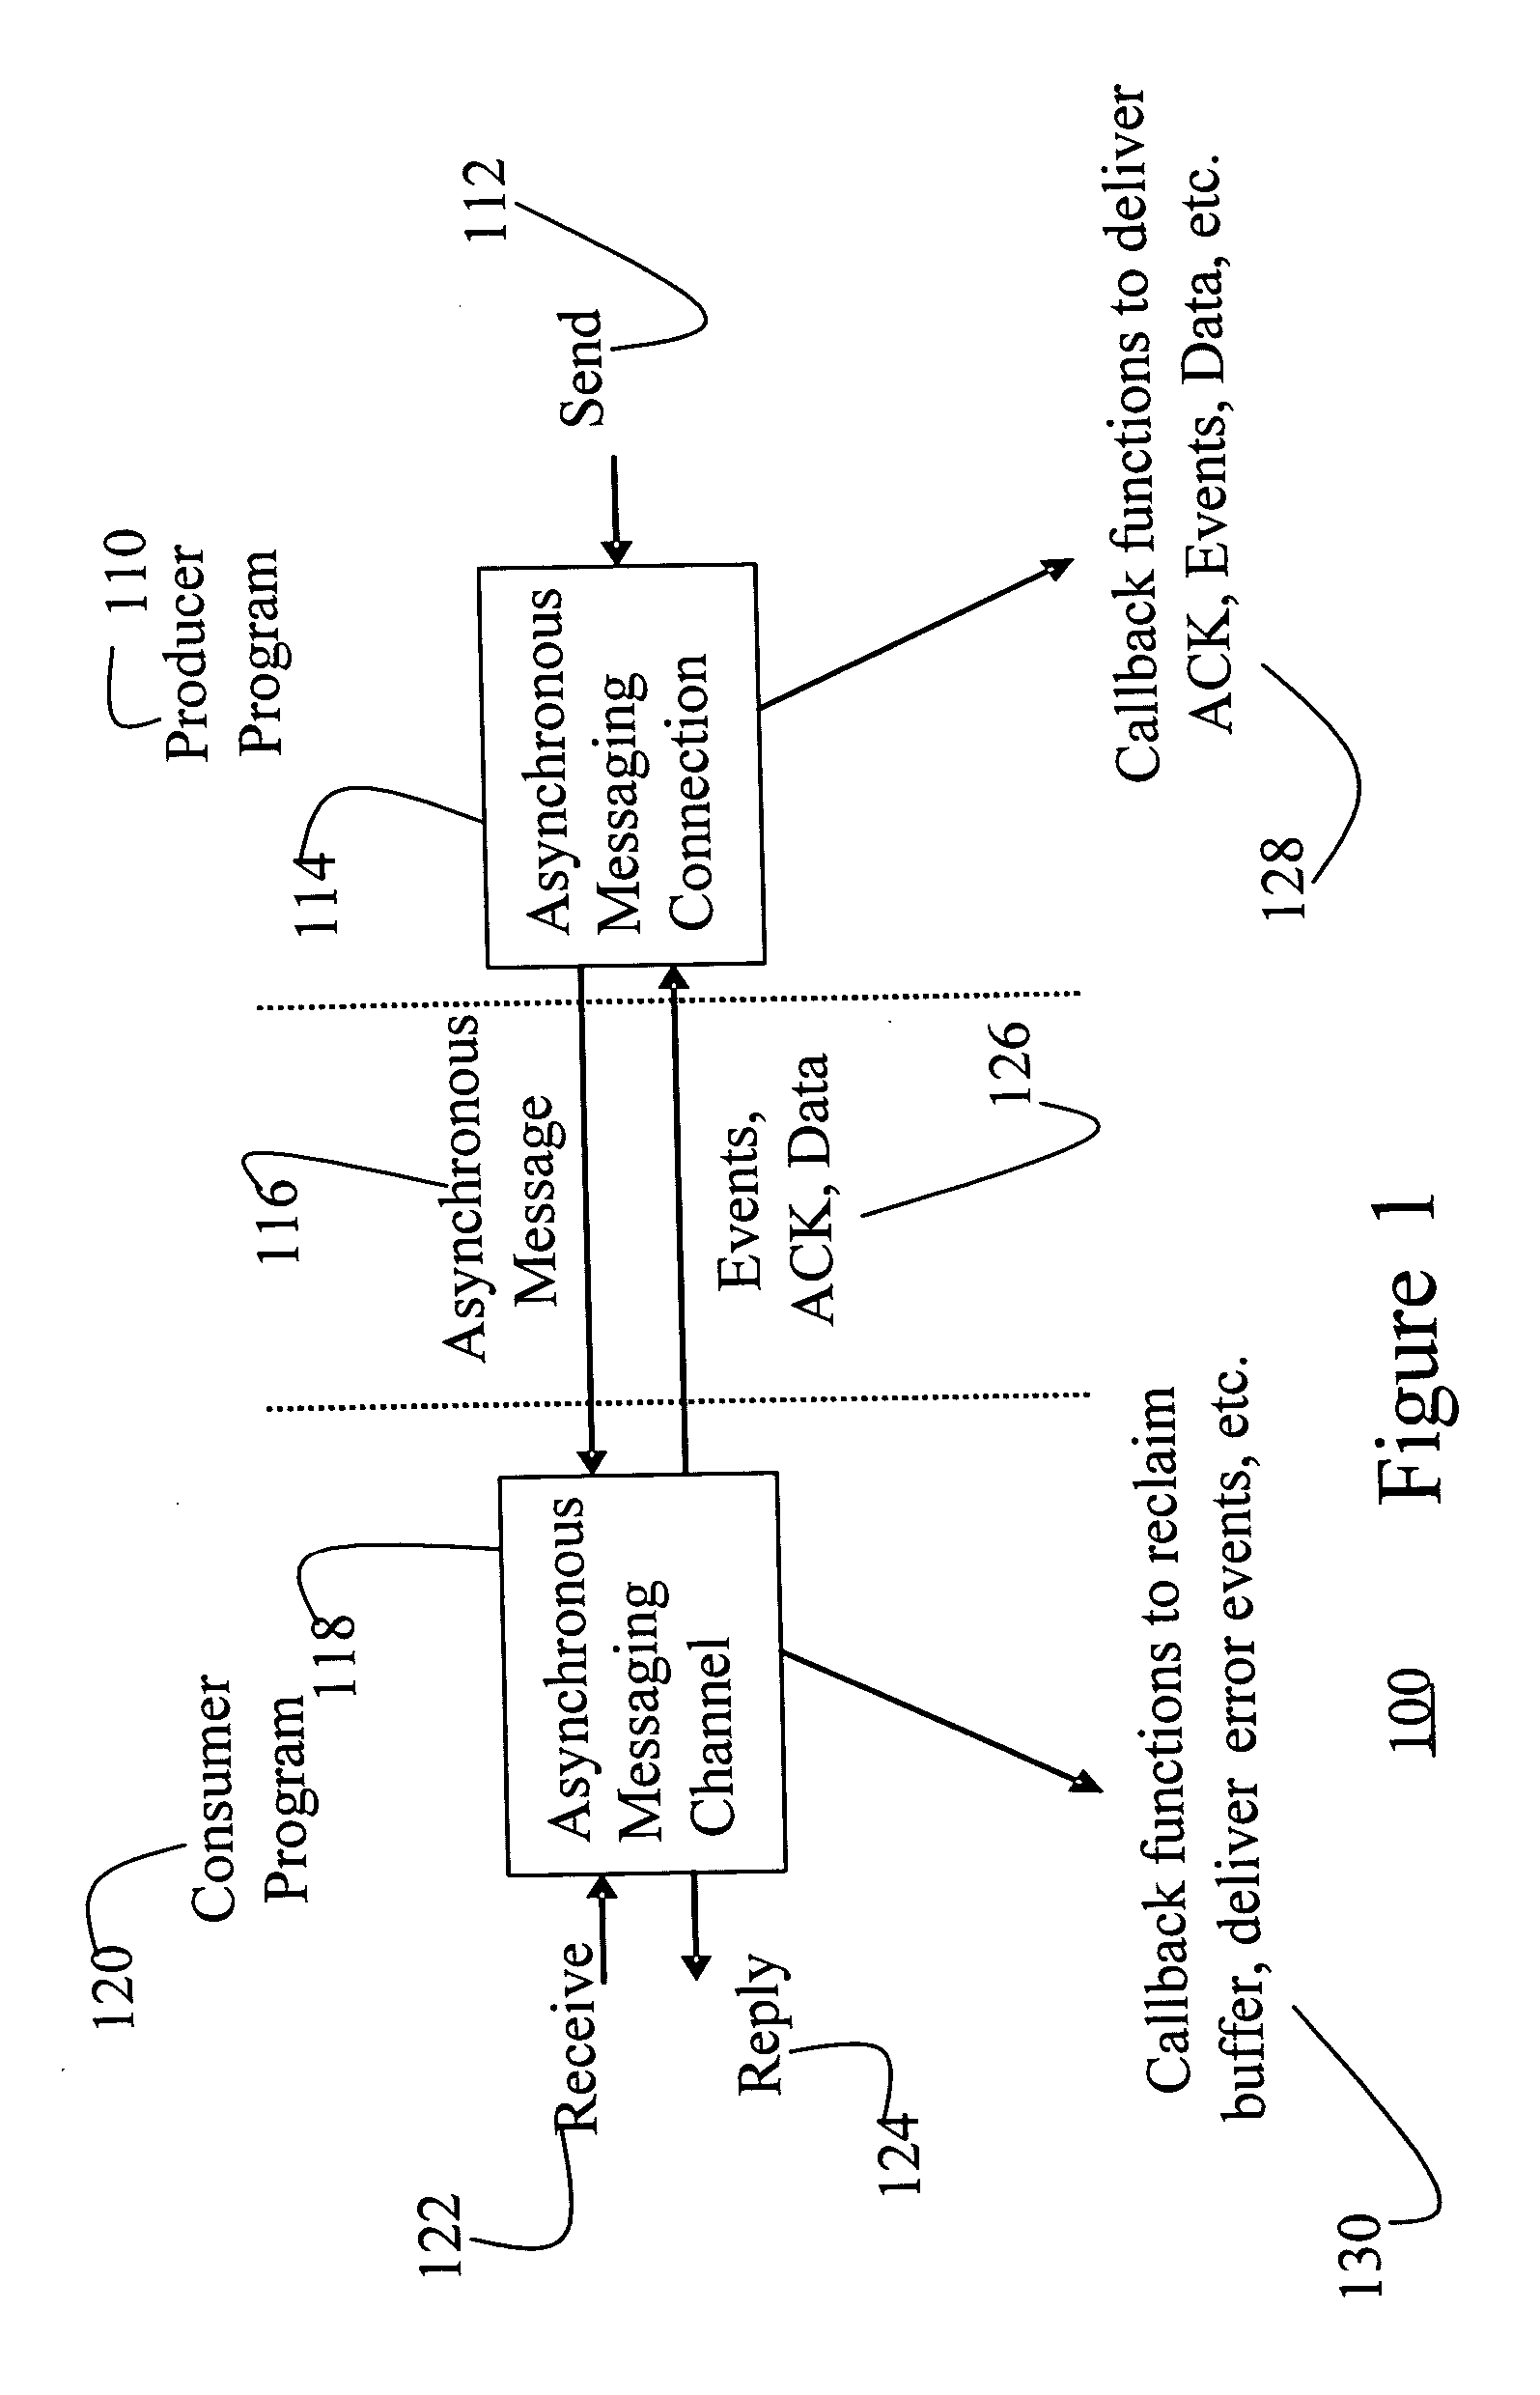 Fast and memory protected asynchronous message scheme in a multi-process and multi-thread environment